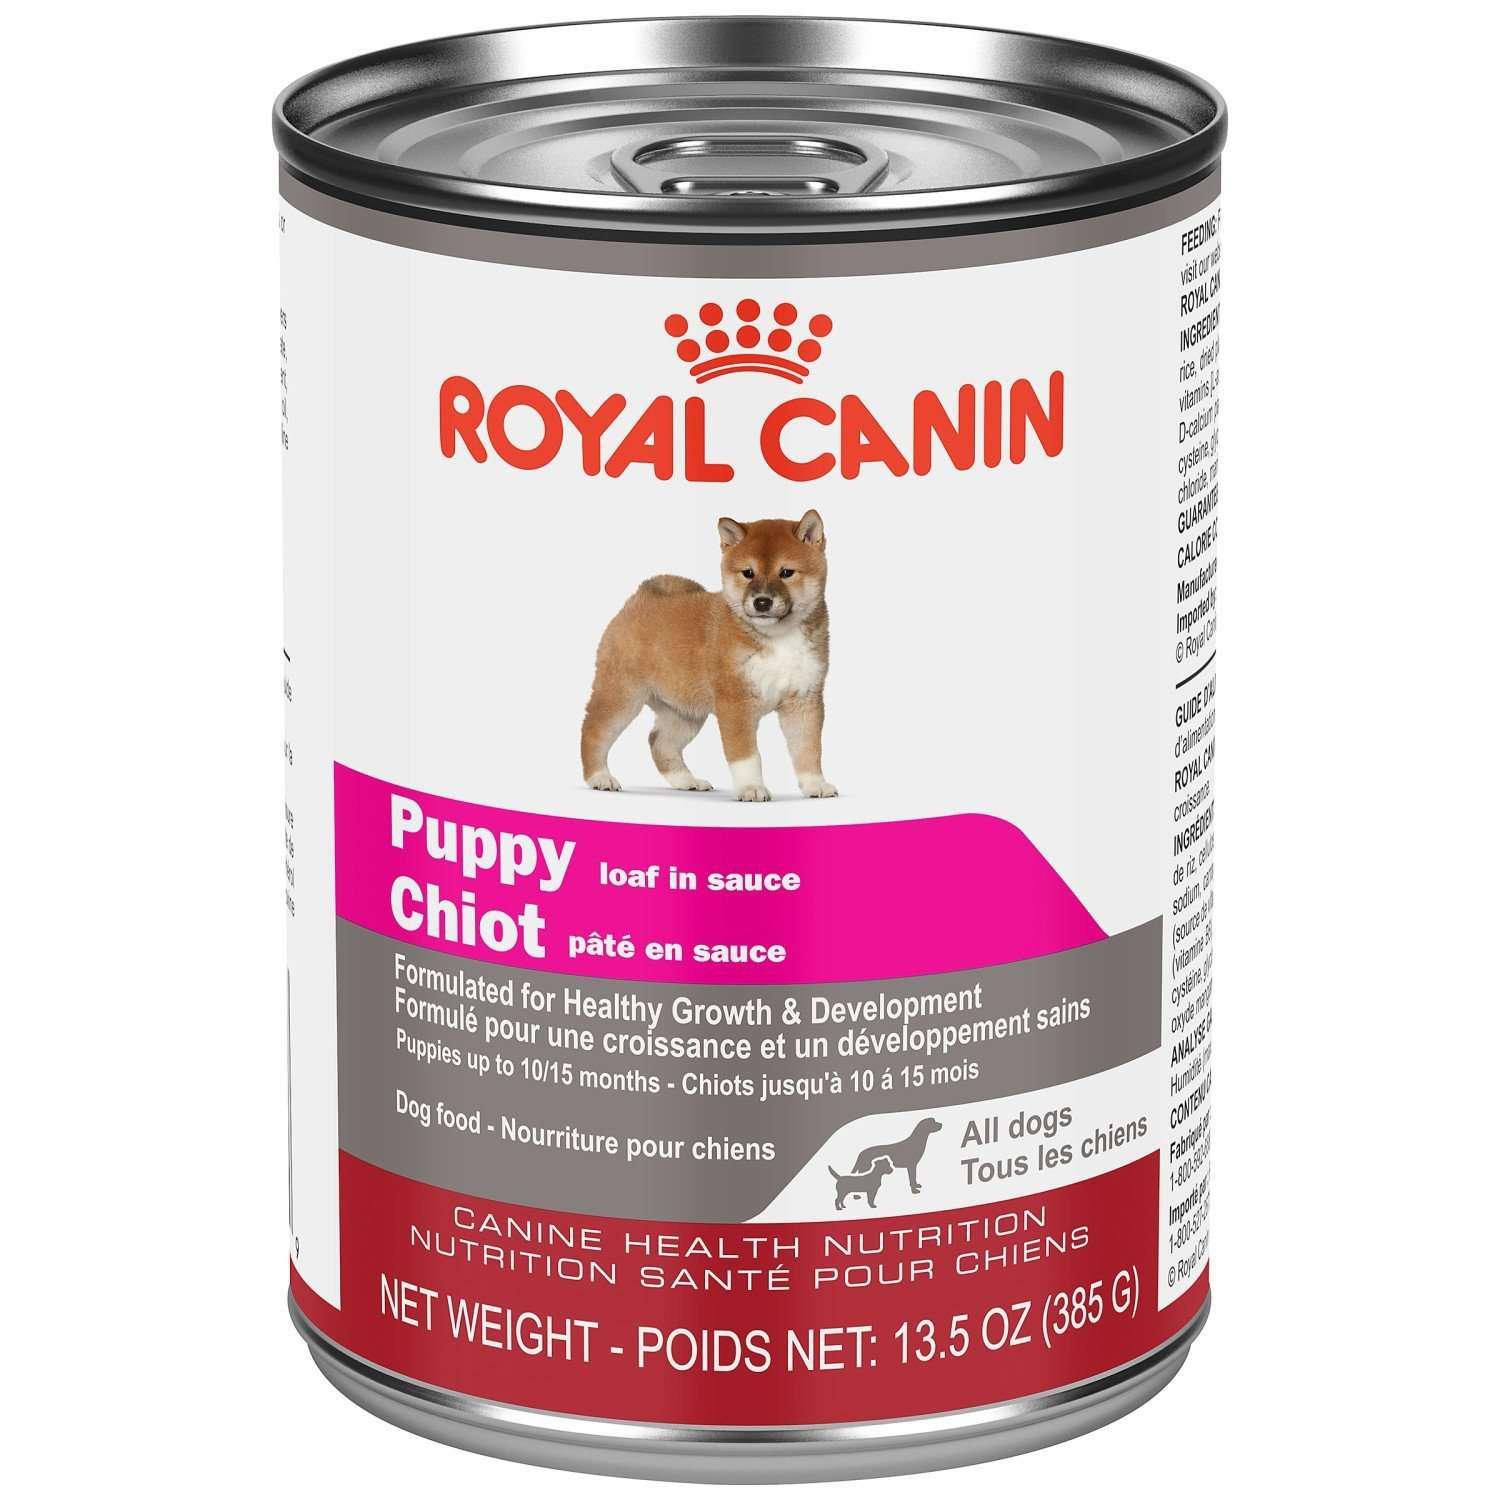 Royal Canin Canned Puppy Food 385g - 385g - Canned Dog Food - Royal Canin - PetMax Canada